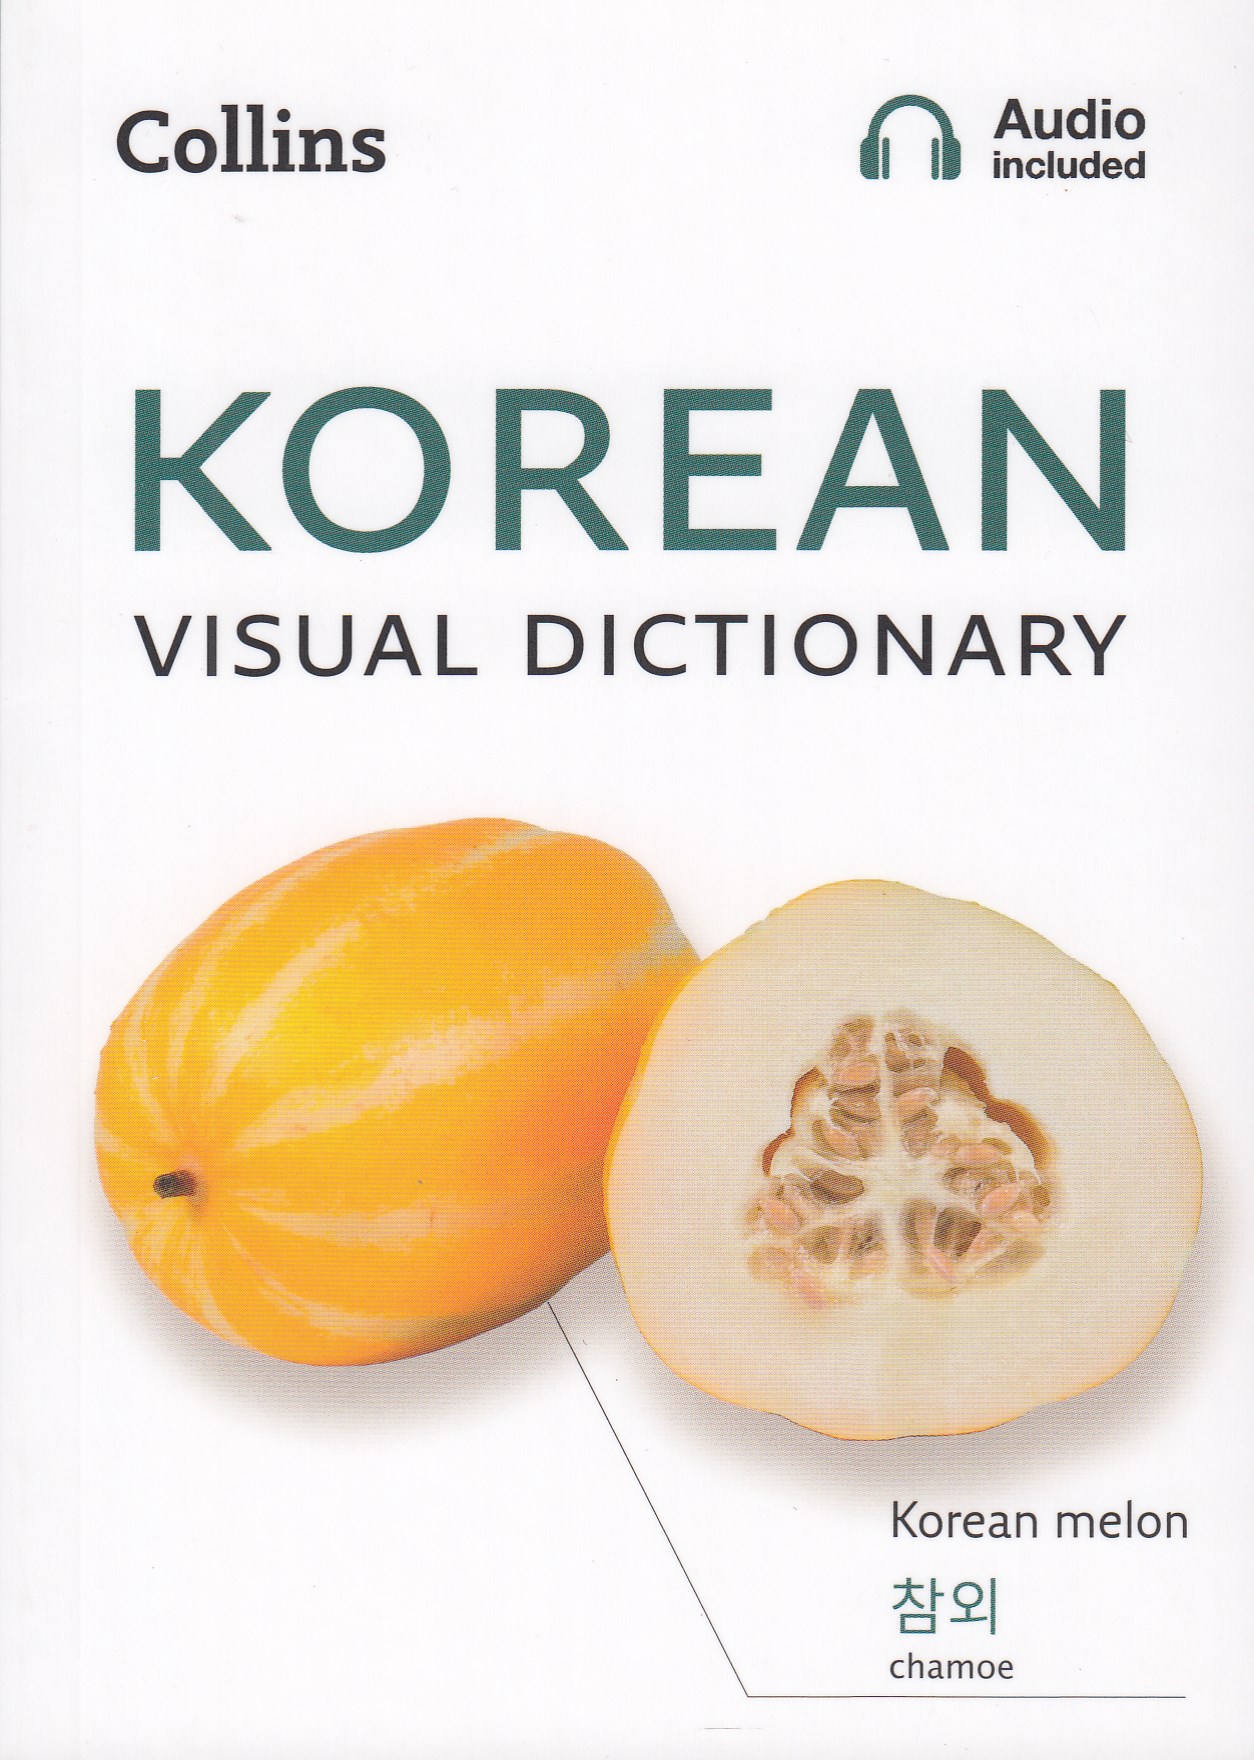 KOREAN VISUAL DICTIONARY by DK Today